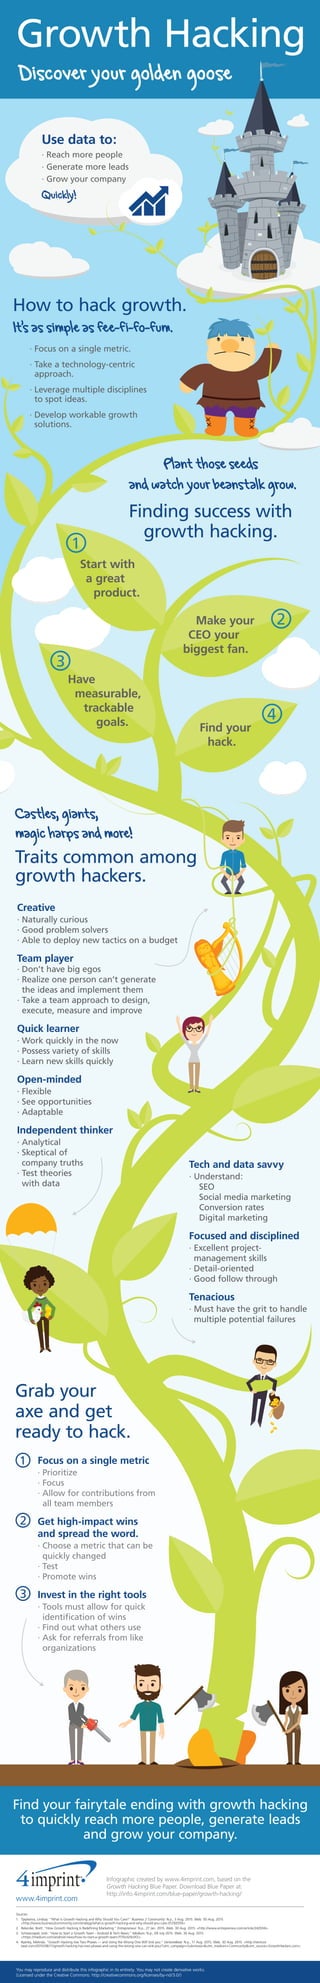 Growth Hacking
Discover your golden goose
Grab your
axe and get
ready to hack.
Creative
· Naturally curious
· Good problem solvers
· Able to deploy new tactics on a budget
Team player
· Don’t have big egos
· Realize one person can’t generate
the ideas and implement them
· Take a team approach to design,
execute, measure and improve
Quick learner
· Work quickly in the now
· Possess variety of skills
· Learn new skills quickly
Open-minded
· Flexible
· See opportunities
· Adaptable
Independent thinker
· Analytical
· Skeptical of
company truths
· Test theories
with data
Creative
· Naturally curious
· Good problem solvers
· Able to deploy new tactics on a budget
Team player
· Don’t have big egos
· Realize one person can’t generate
the ideas and implement them
· Take a team approach to design,
execute, measure and improve
Quick learner
· Work quickly in the now
· Possess variety of skills
· Learn new skills quickly
Open-minded
· Flexible
· See opportunities
· Adaptable
Independent thinker
· Analytical
· Skeptical of
company truths
· Test theories
with data
Tech and data savvy
· Understand:
SEO
Social media marketing
Conversion rates
Digital marketing
Focused and disciplined
· Excellent project-
management skills
· Detail-oriented
· Good follow through
Tenacious
· Must have the grit to handle
multiple potential failures
Tech and data savvy
· Understand:
SEO
Social media marketing
Conversion rates
Digital marketing
Focused and disciplined
· Excellent project-
management skills
· Detail-oriented
· Good follow through
Tenacious
· Must have the grit to handle
multiple potential failures
· Focus on a single metric.
· Take a technology-centric
approach.
· Leverage multiple disciplines
to spot ideas.
· Develop workable growth
solutions.
Use data to:
· Reach more people
· Generate more leads
· Grow your company
Quickly!
Plant those seeds
and watch your beanstalk grow.
Finding success with
growth hacking.
How to hack growth.
It’s as simple as fee-fi-fo-fum.
Castles, giants,
magic harps and more!
Traits common among
growth hackers.
Make your
CEO your
biggest fan.
Have
measurable,
trackable
goals. Find your
hack.
Start with
a great
product.
Focus on a single metric
· Prioritize
· Focus
· Allow for contributions from
all team members
Get high-impact wins
and spread the word.
· Choose a metric that can be
quickly changed
· Test
· Promote wins
Invest in the right tools
· Tools must allow for quick
identification of wins
· Find out what others use
· Ask for referrals from like
organizations
Invest in the right tools
· Tools must allow for quick
identification of wins
· Find out what others use
· Ask for referrals from like
organizations
1
1
2
3
4
2
3
Sources:
1. Tjepkema, Lindsay. “What Is Growth Hacking and Why Should You Care?” Business 2 Community. N.p., 3 Aug. 2015. Web. 30 Aug. 2015.
<http://www.business2community.com/strategy/what-is-growth-hacking-and-why-should-you-care-01292059>.
2. Relander, Brett. “How Growth Hacking Is Redefining Marketing.” Entrepreneur. N.p., 27 Jan. 2015. Web. 30 Aug. 2015. <http://www.entrepreneur.com/article/242034>.
3. Schwarzapel, Josh. ”How to Start a Growth Team - Android & Tech News.” Medium. N.p., 09 July 2015. Web. 30 Aug. 2015.
<https://medium.com/android-news/how-to-start-a-growth-team-ff70cd29c0f2>.
4. Byerley, Melinda. “Growth Hacking Has Two Phases — and Using the Wrong One Will Sink you.” VentureBeat. N.p., 11 Aug. 2015. Web. 30 Aug. 2015. <http://venture
beat.com/2015/08/11/growth-hacking-has-two-phases-and-using-the-wrong-one-can-sink-you/?utm_campaign=Submission&utm_medium=Community&utm_source=GrowthHackers.com>.
You may reproduce and distribute this infographic in its entirety. You may not create derivative works.
(Licensed under the Creative Commons: http://creativecommons.org/licenses/by-nd/3.0/)
www.4imprint.com
Infographic created by www.4imprint.com, based on the
Growth Hacking Blue Paper. Download Blue Paper at:
http://info.4imprint.com/blue-paper/growth-hacking/
Find your fairytale ending with growth hacking
to quickly reach more people, generate leads
and grow your company.
 